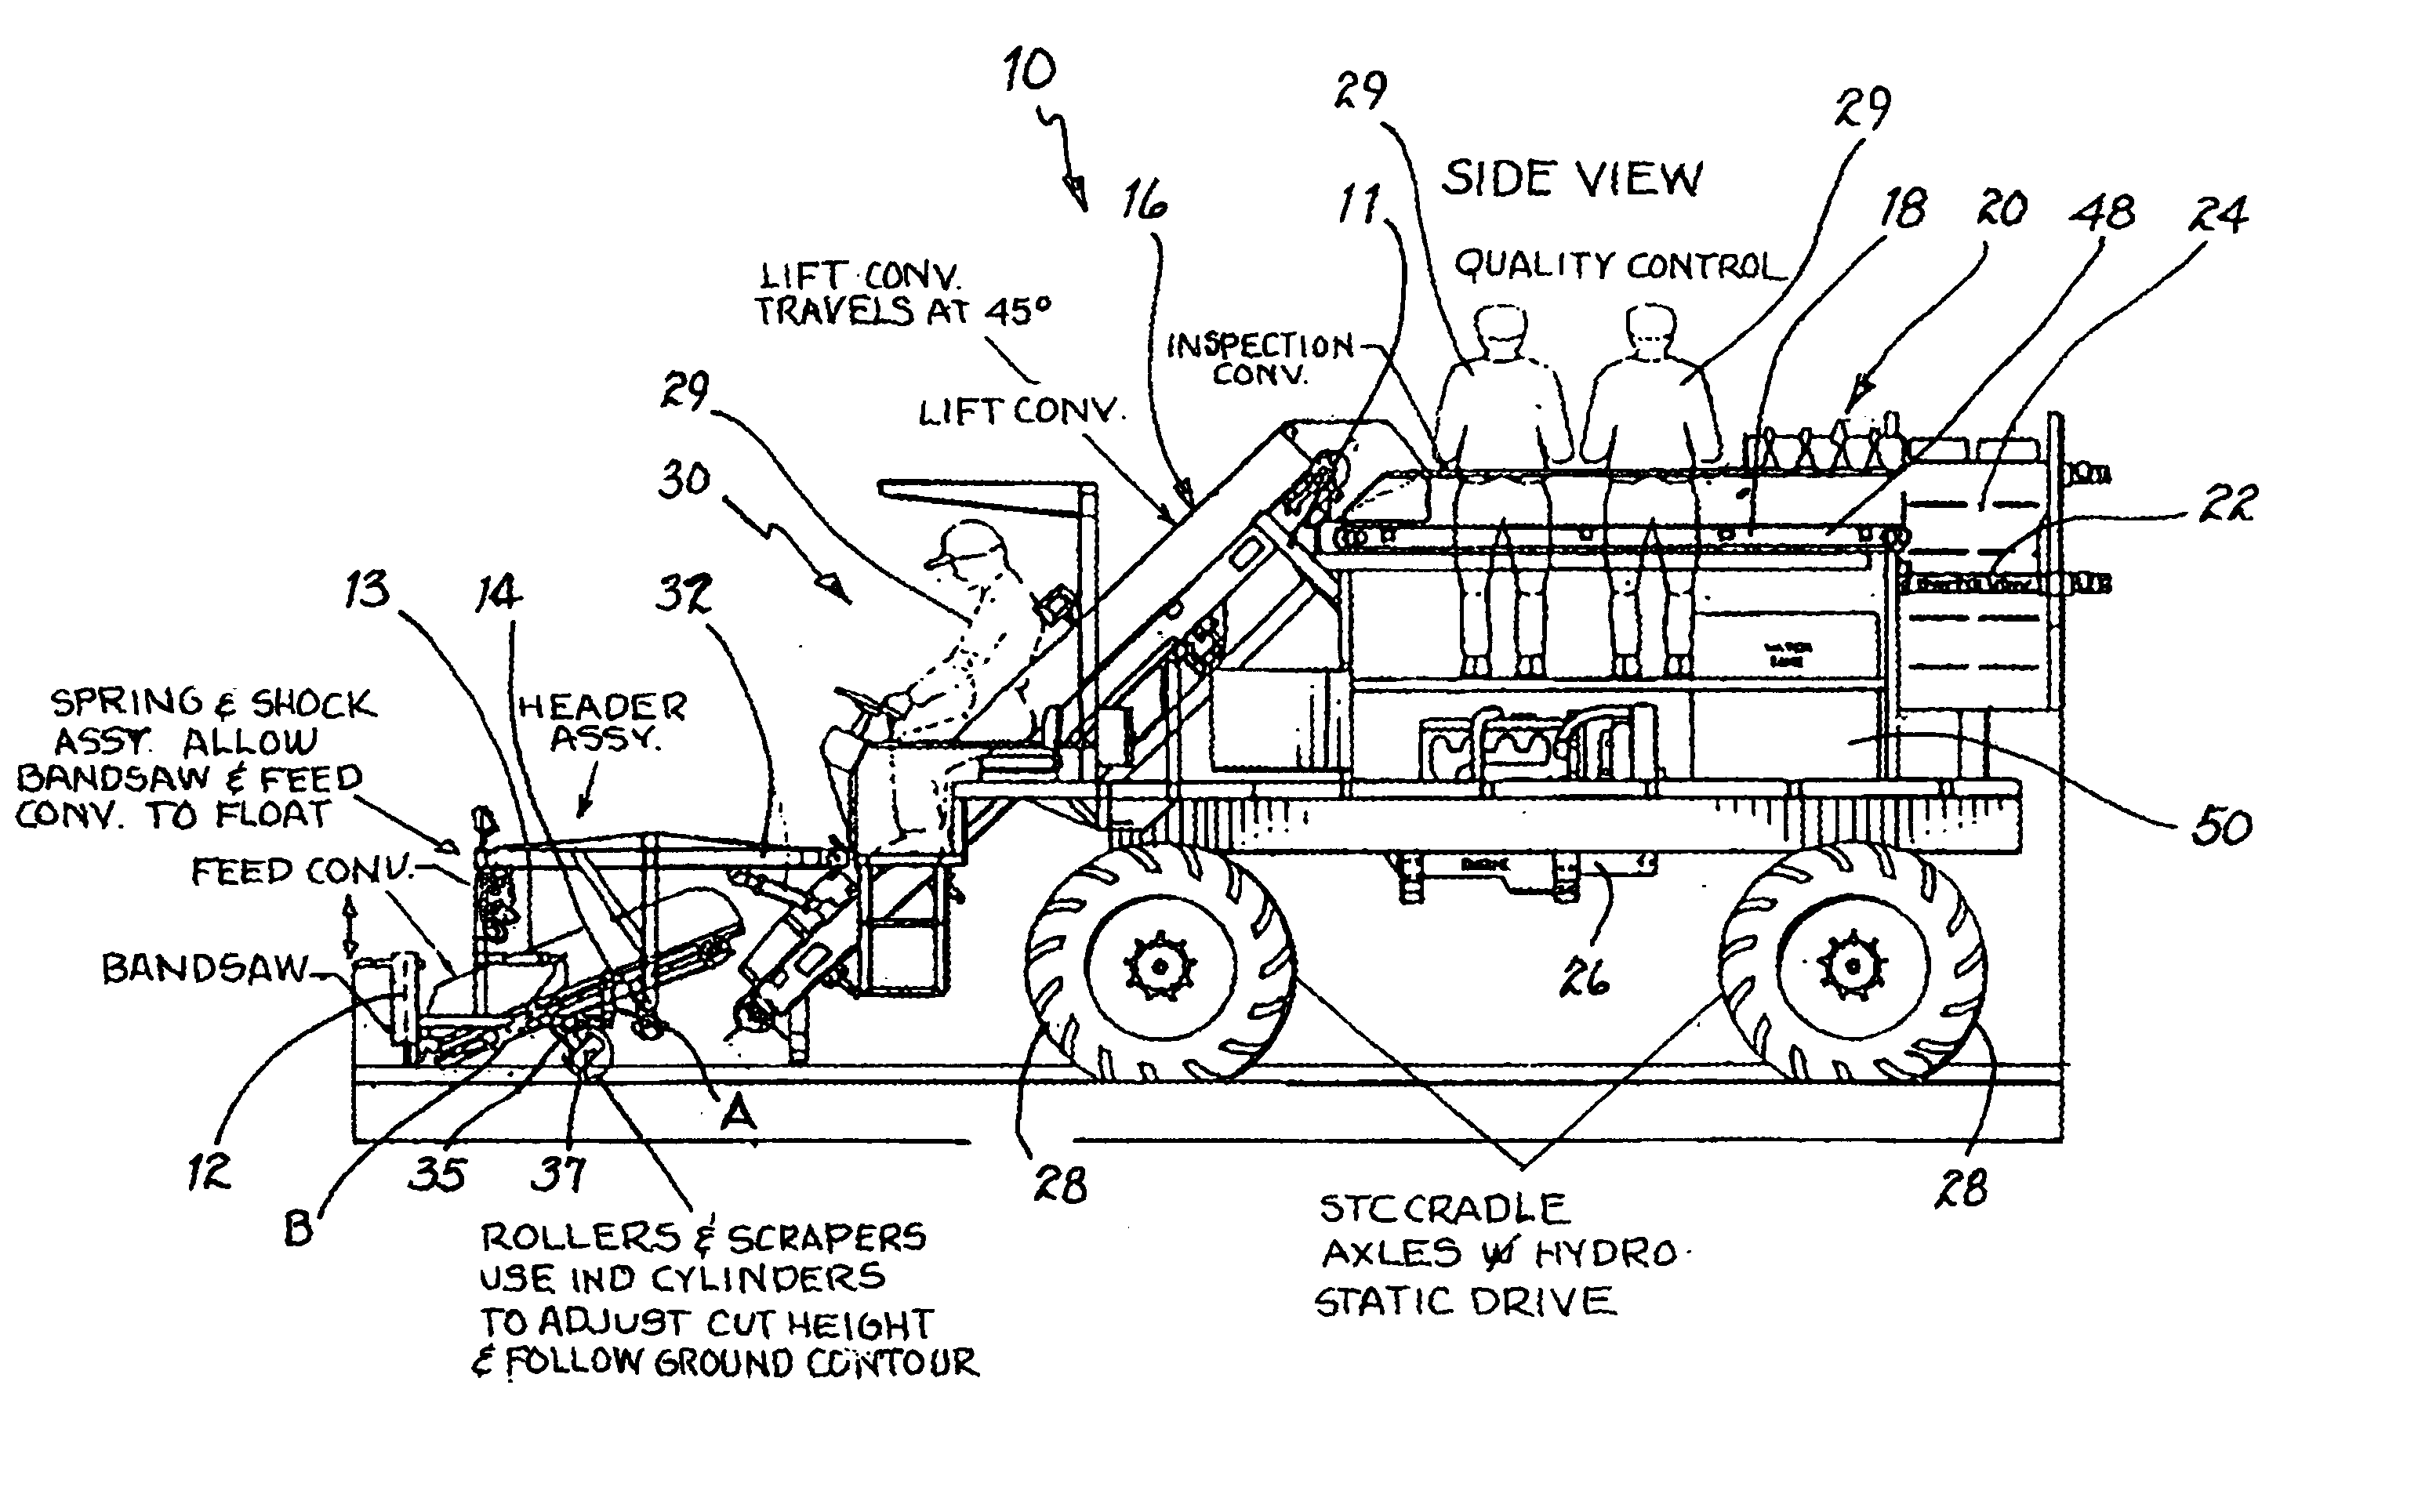 Lettuce harvesting apparatus and method therefor